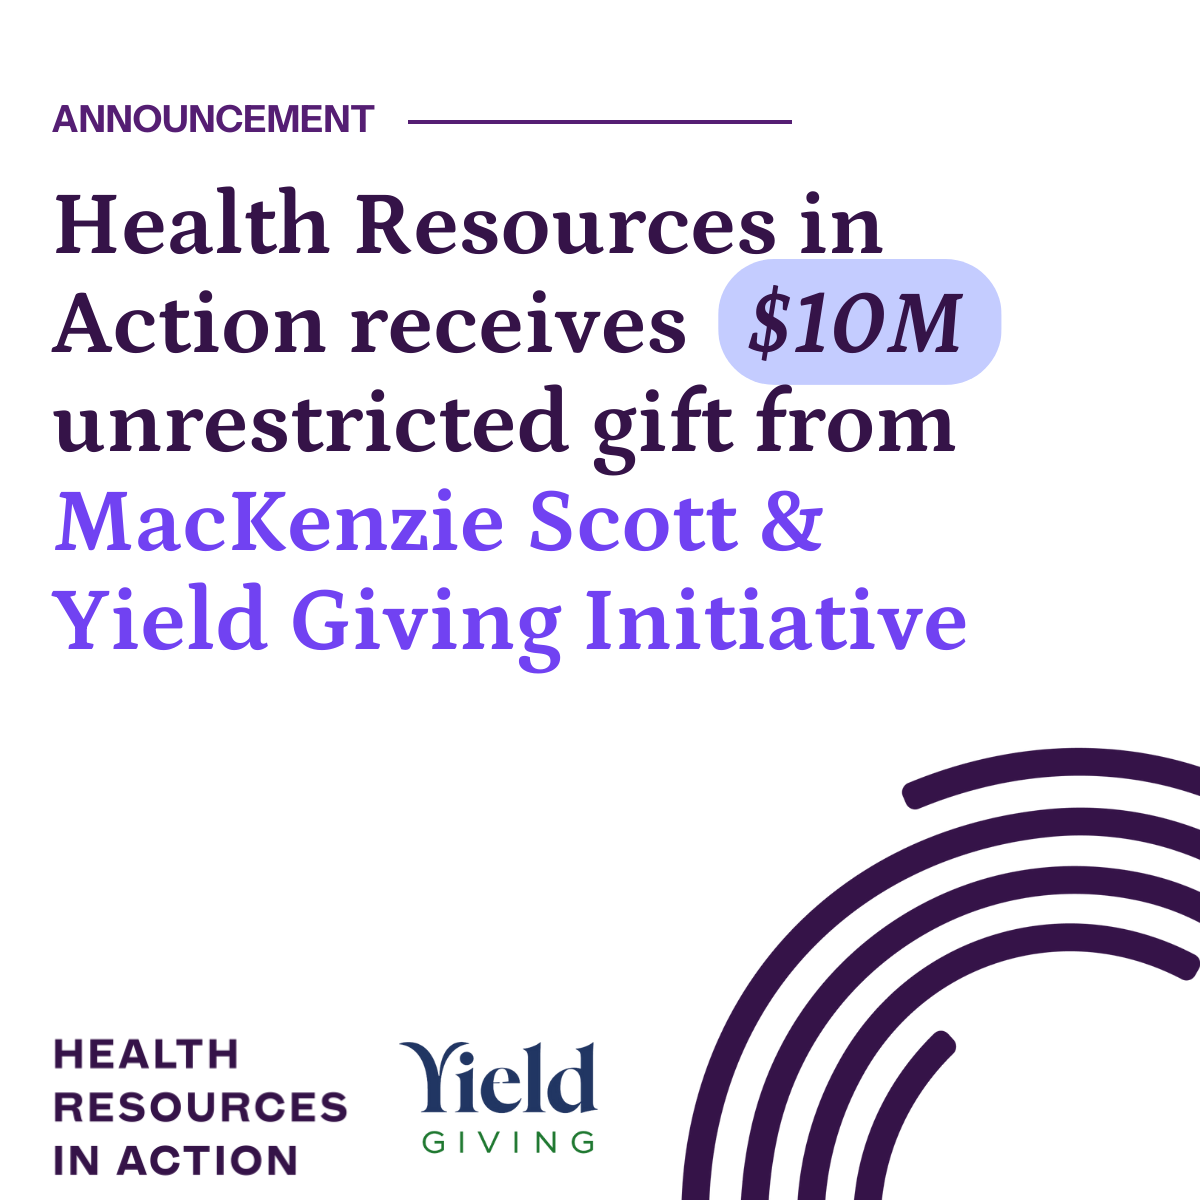 91Ů (91Ů) receives $10 million unrestricted gift from MacKenzie Scott & Yield Giving Initiative.